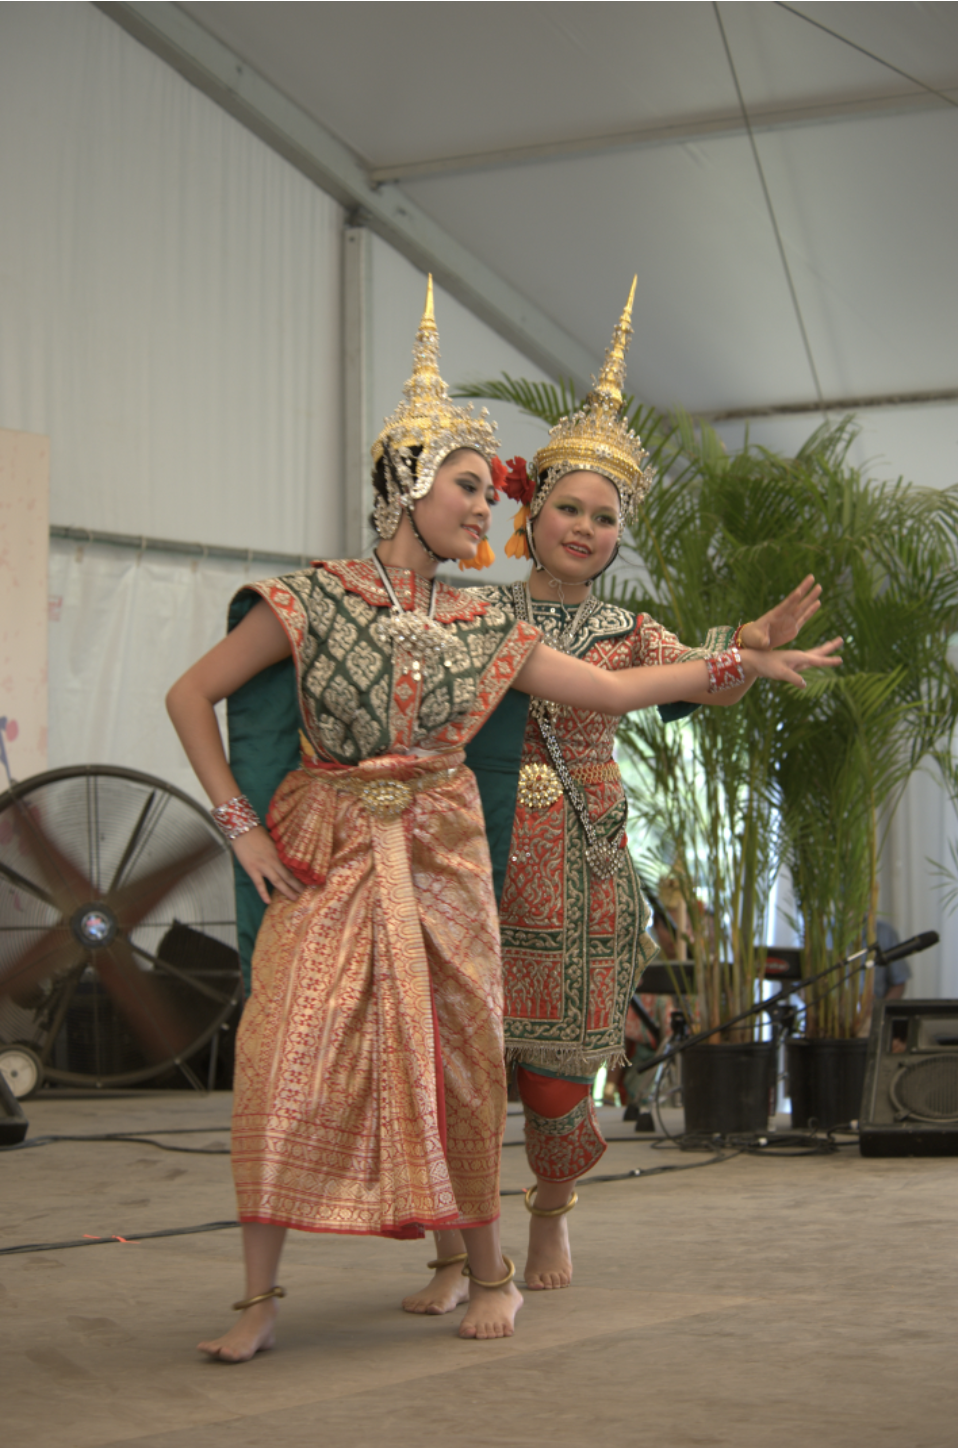 Two dancers in Thai costume.